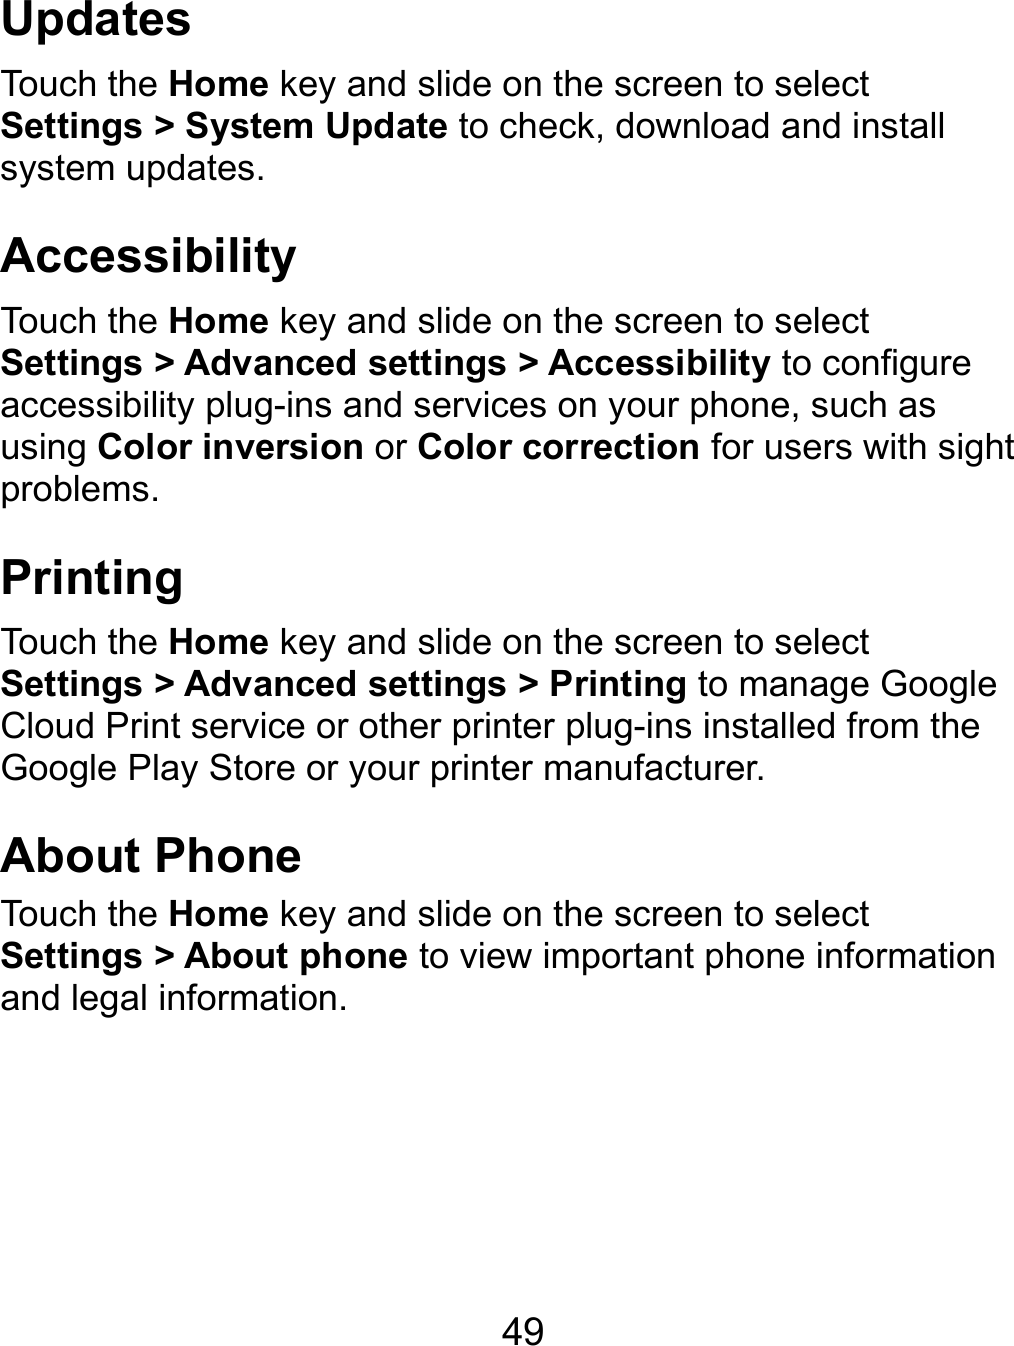  49 Updates Touch the Home key and slide on the screen to select Settings &gt; System Update to check, download and install system updates. Accessibility Touch the Home key and slide on the screen to select Settings &gt; Advanced settings &gt; Accessibility to configure accessibility plug-ins and services on your phone, such as using Color inversion or Color correction for users with sight problems. Printing Touch the Home key and slide on the screen to select Settings &gt; Advanced settings &gt; Printing to manage Google Cloud Print service or other printer plug-ins installed from the Google Play Store or your printer manufacturer. About Phone Touch the Home key and slide on the screen to select Settings &gt; About phone to view important phone information and legal information.  